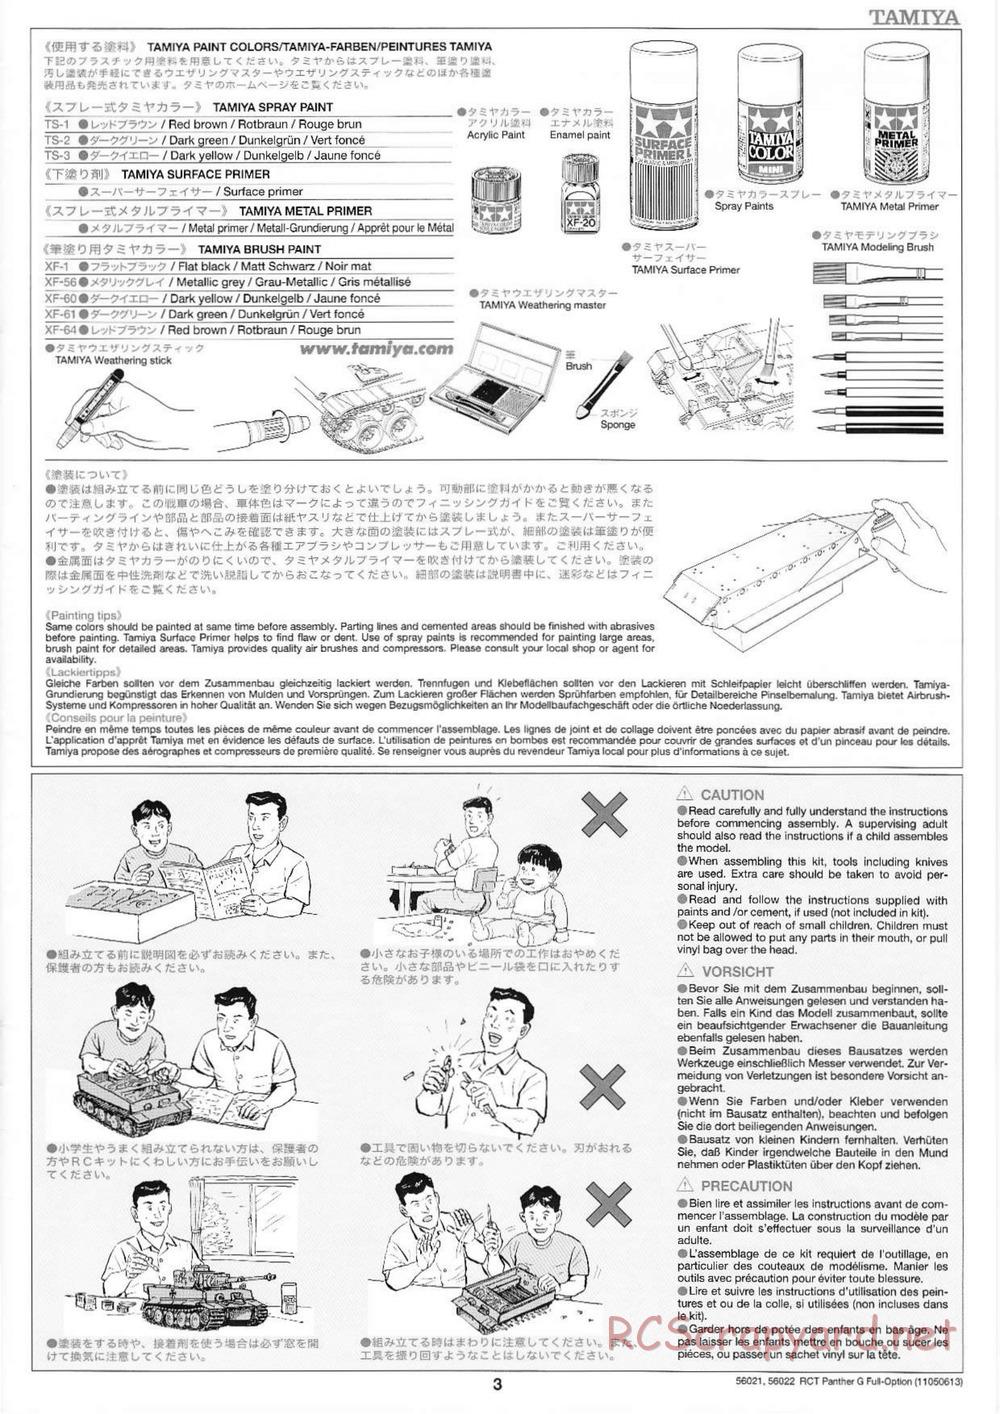 Tamiya - Panther Type G - 1/16 Scale Chassis - Manual - Page 3